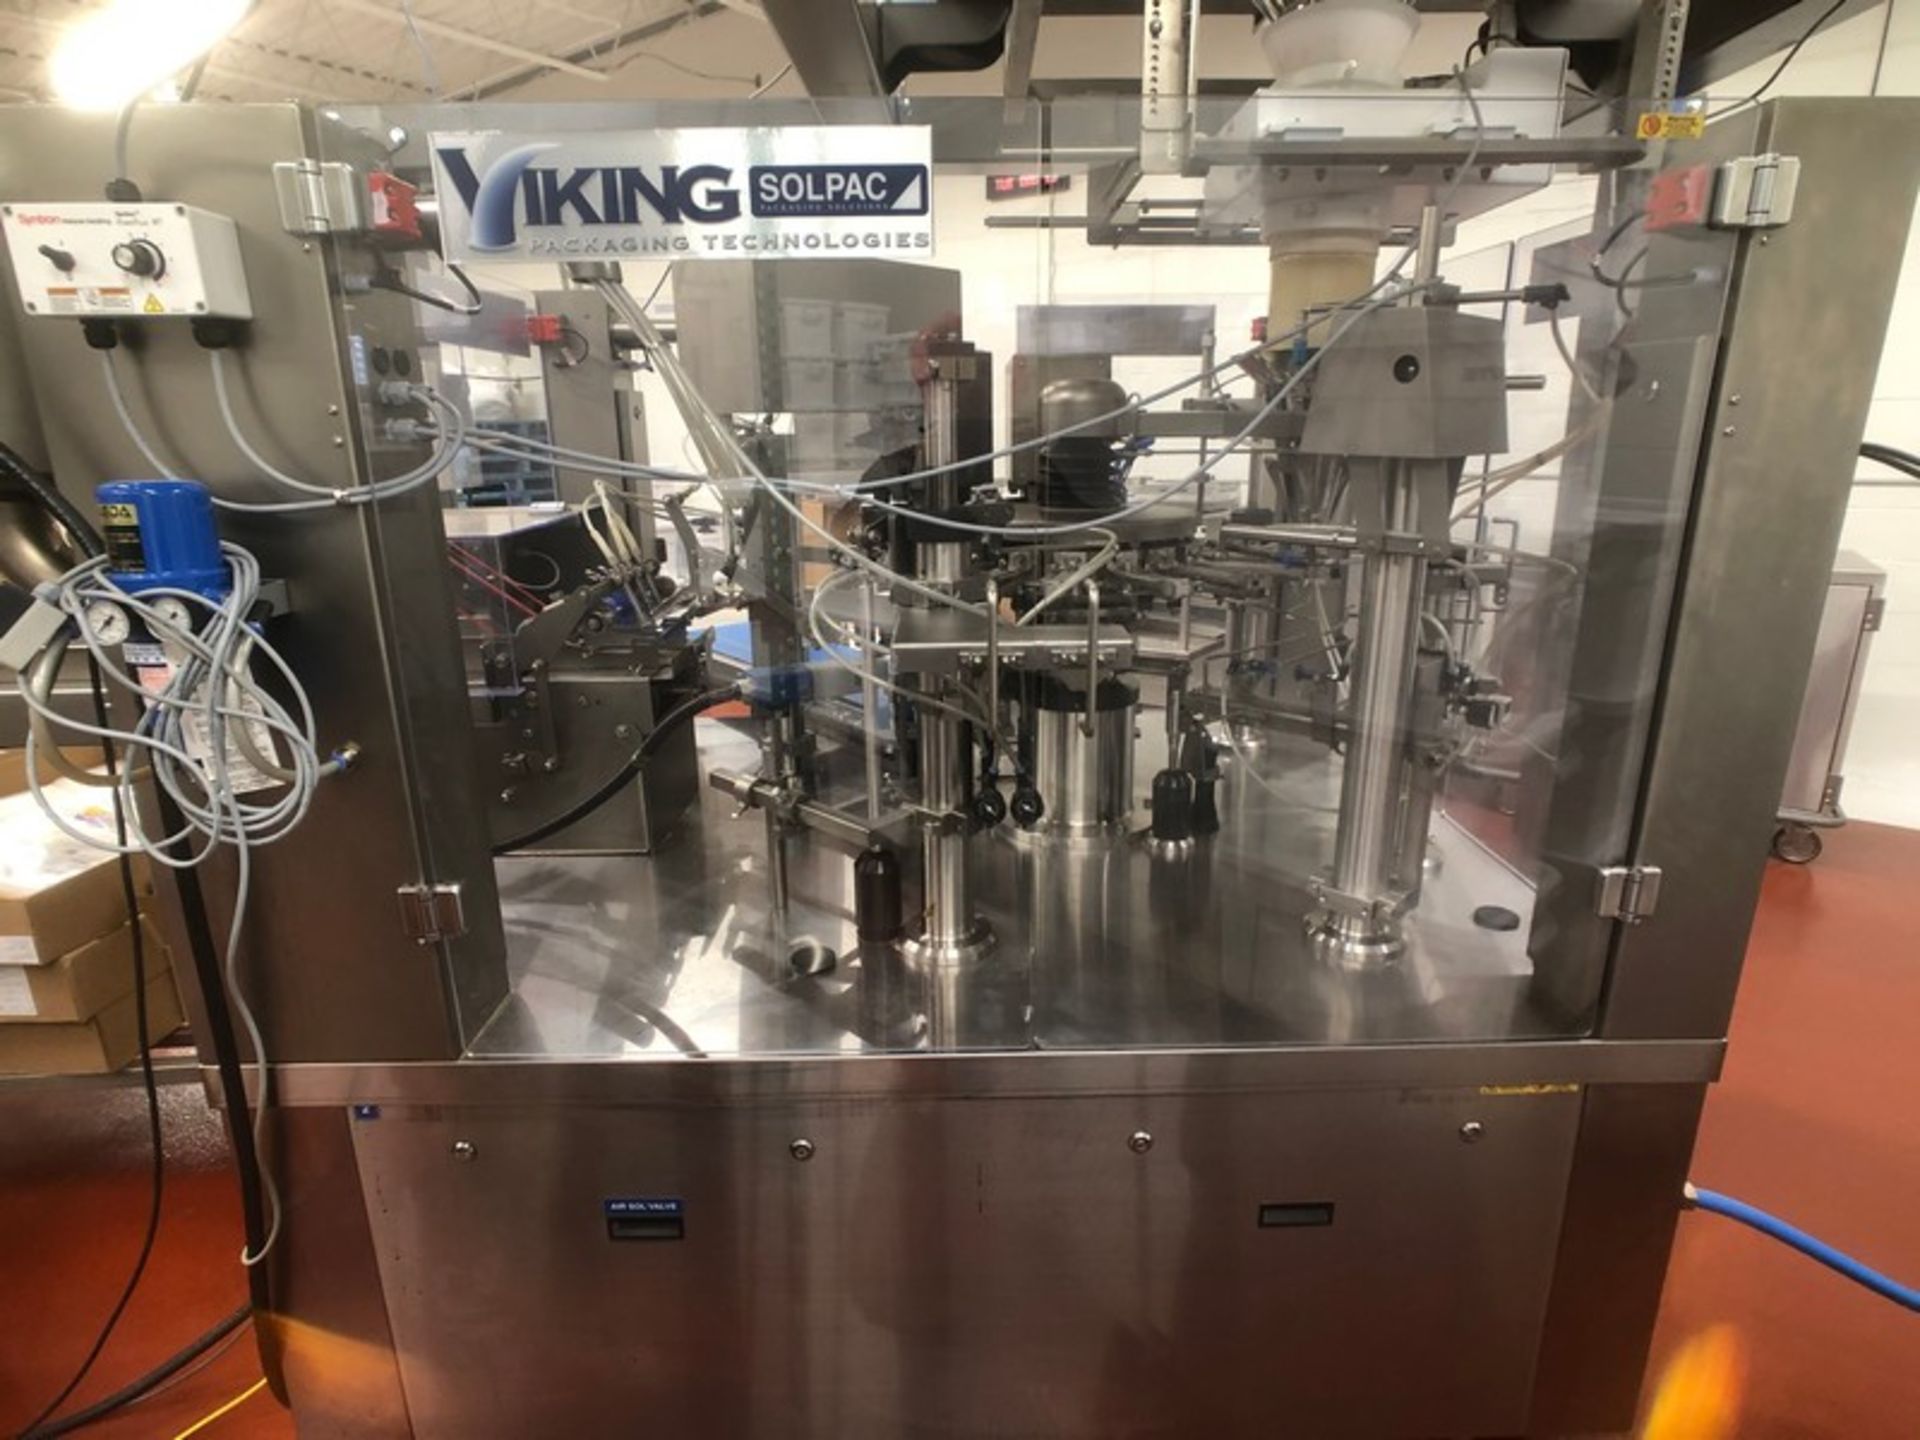 2017 Viking/Solpac Premade Pouch Packager, Model 8S-235, S/N PO-21864, 480V, Previously Running - Image 4 of 22